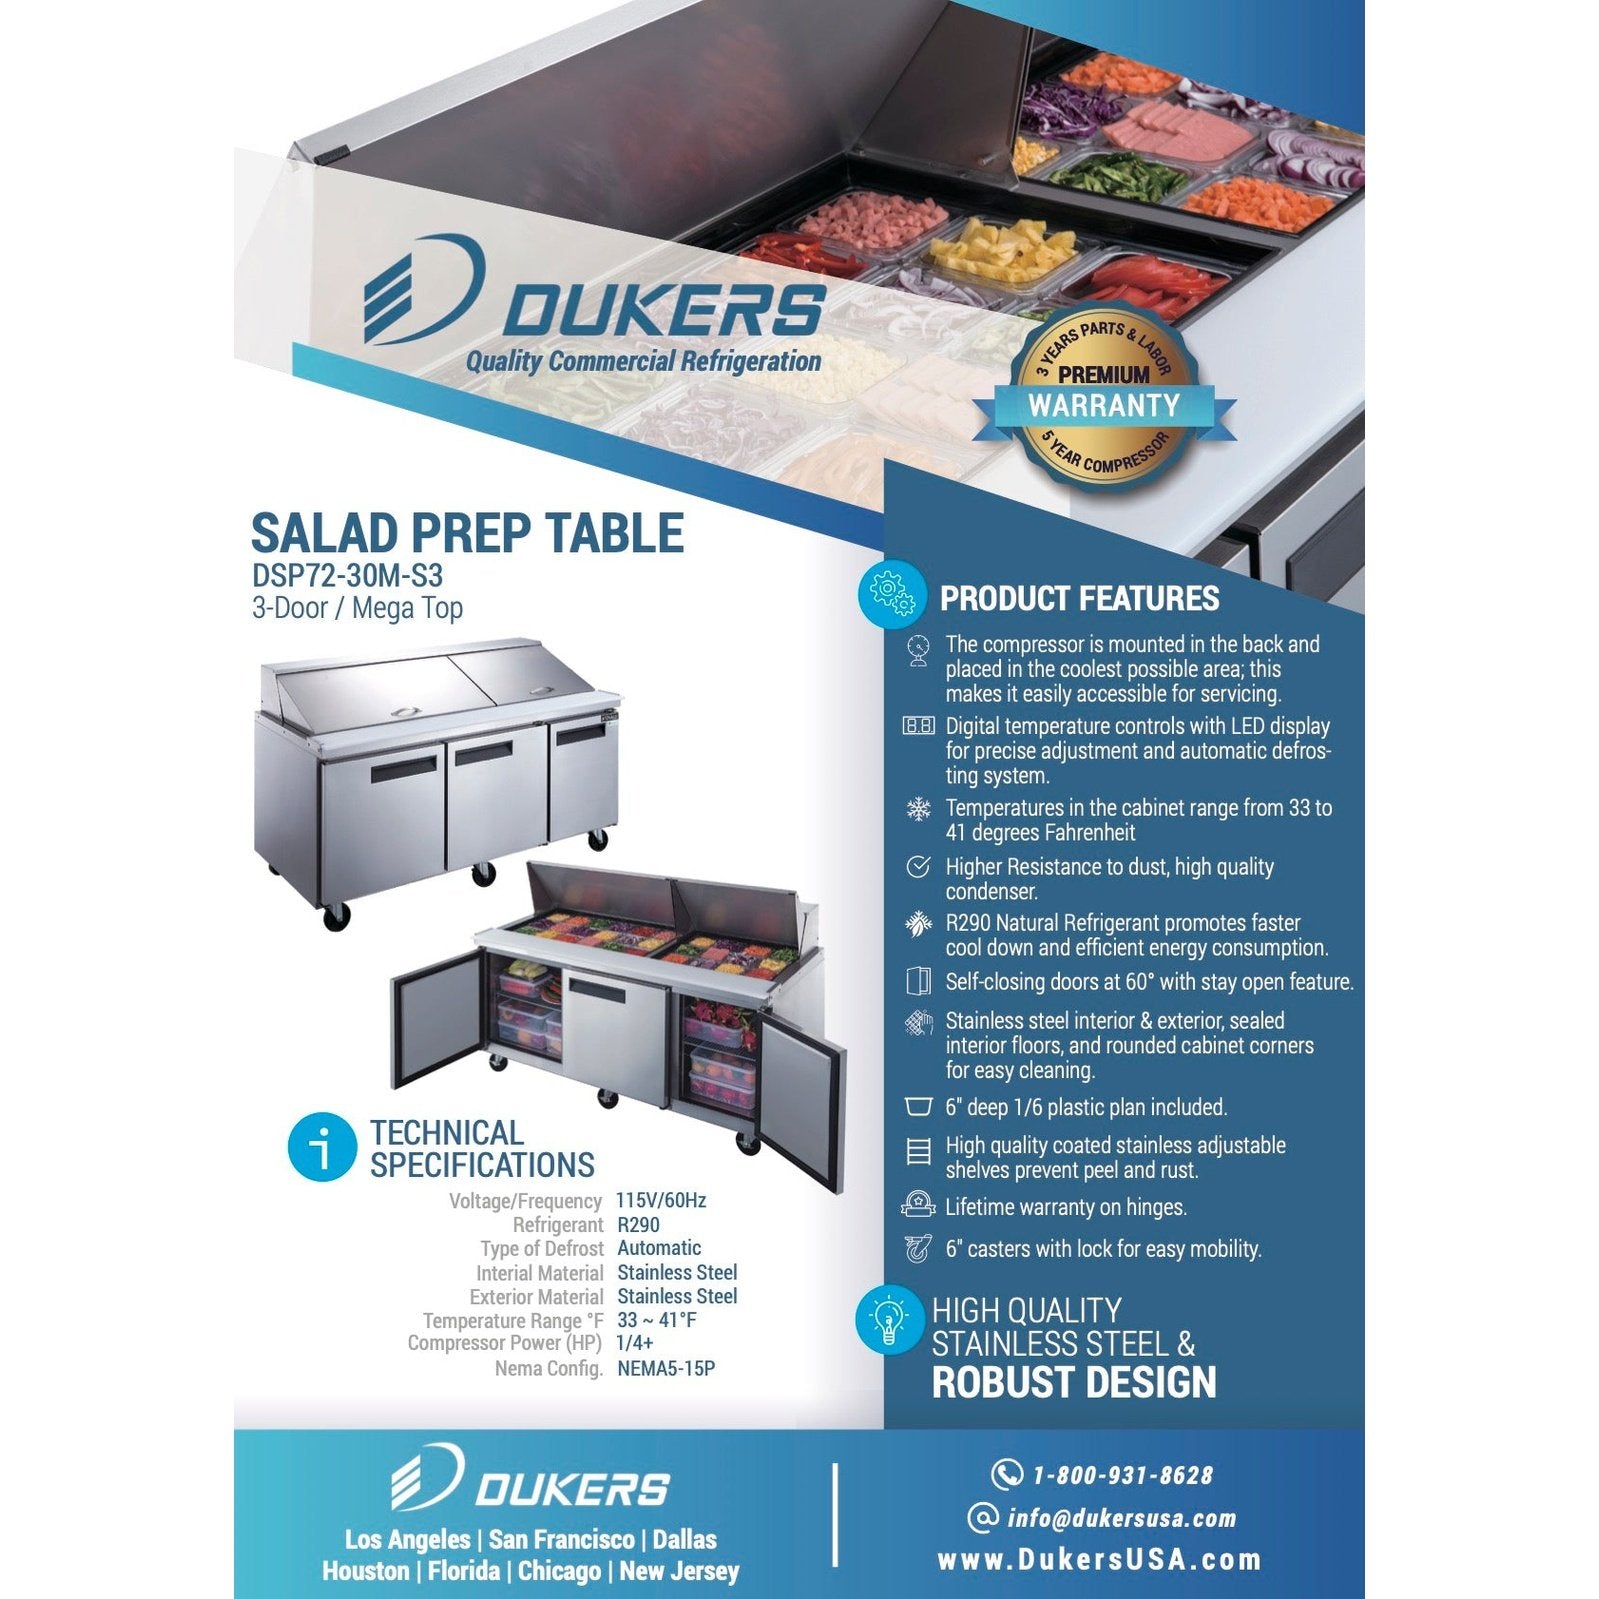 Dukers DSP72-30M-S3 3-Door Commercial Food Prep Table Refrigerator in Stainless Steel with Mega Top